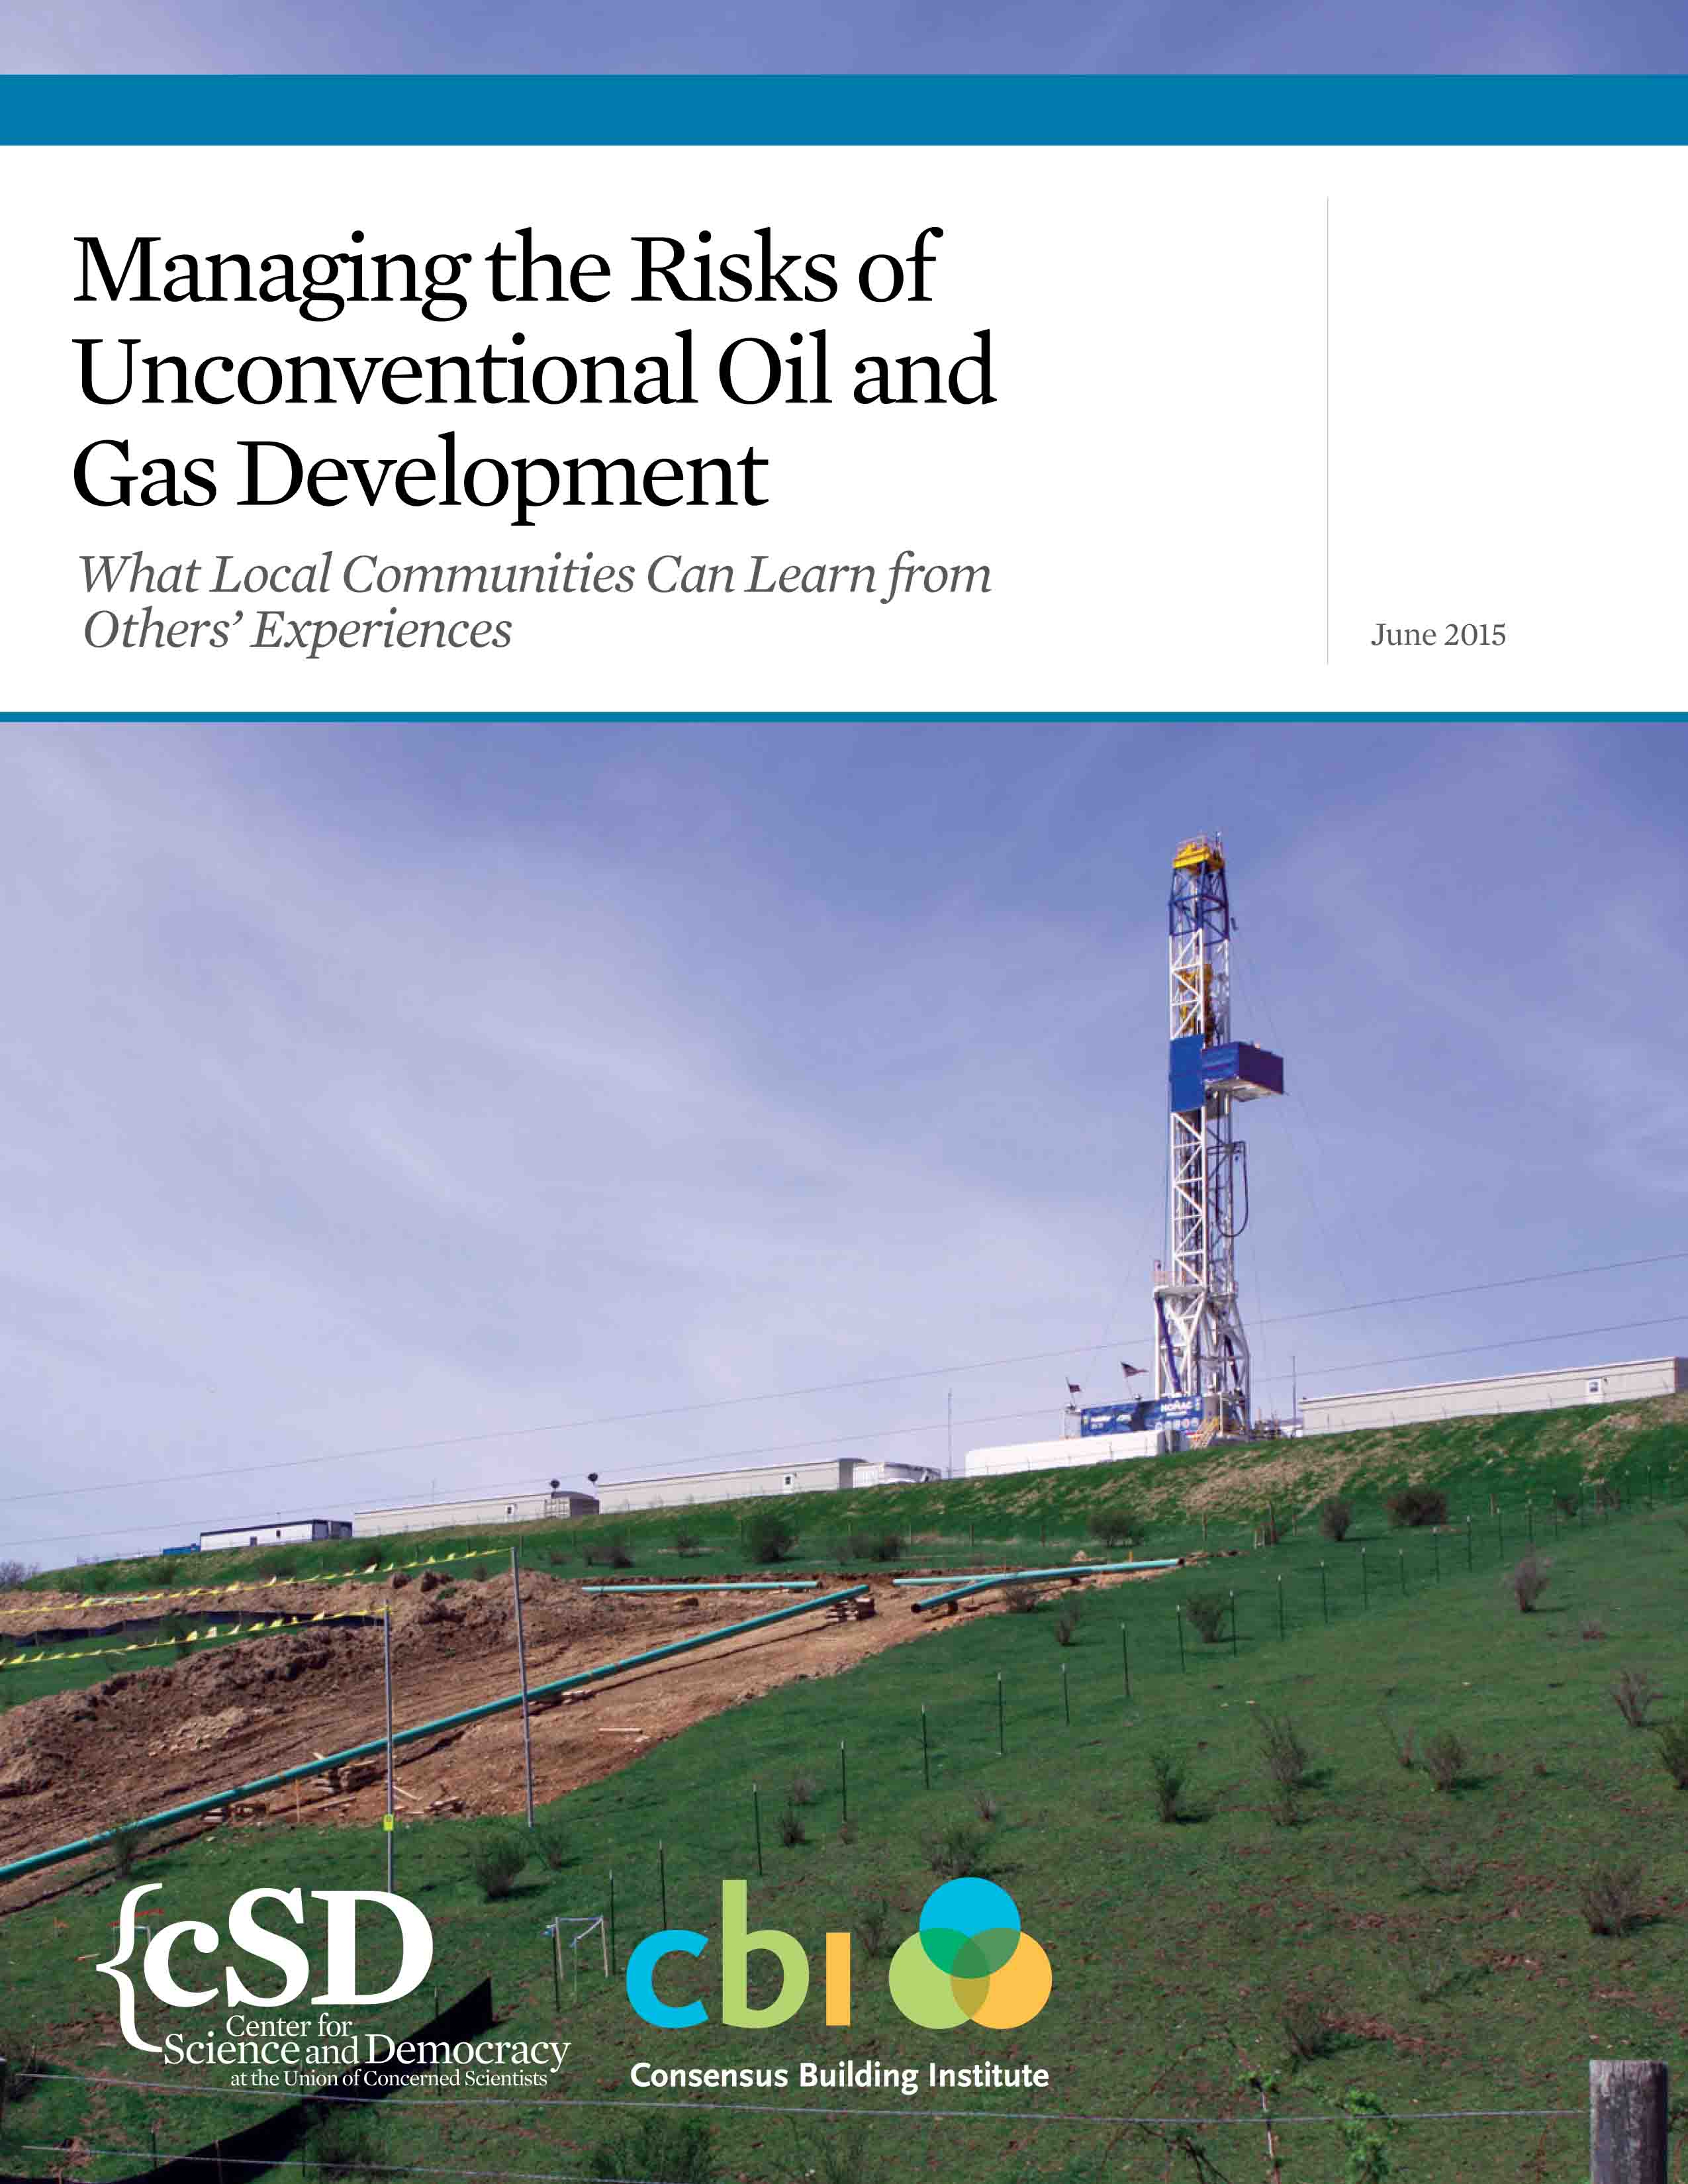 edited report on risks of fracking on communities, June 2015; UCS used my photos for cover and page 8